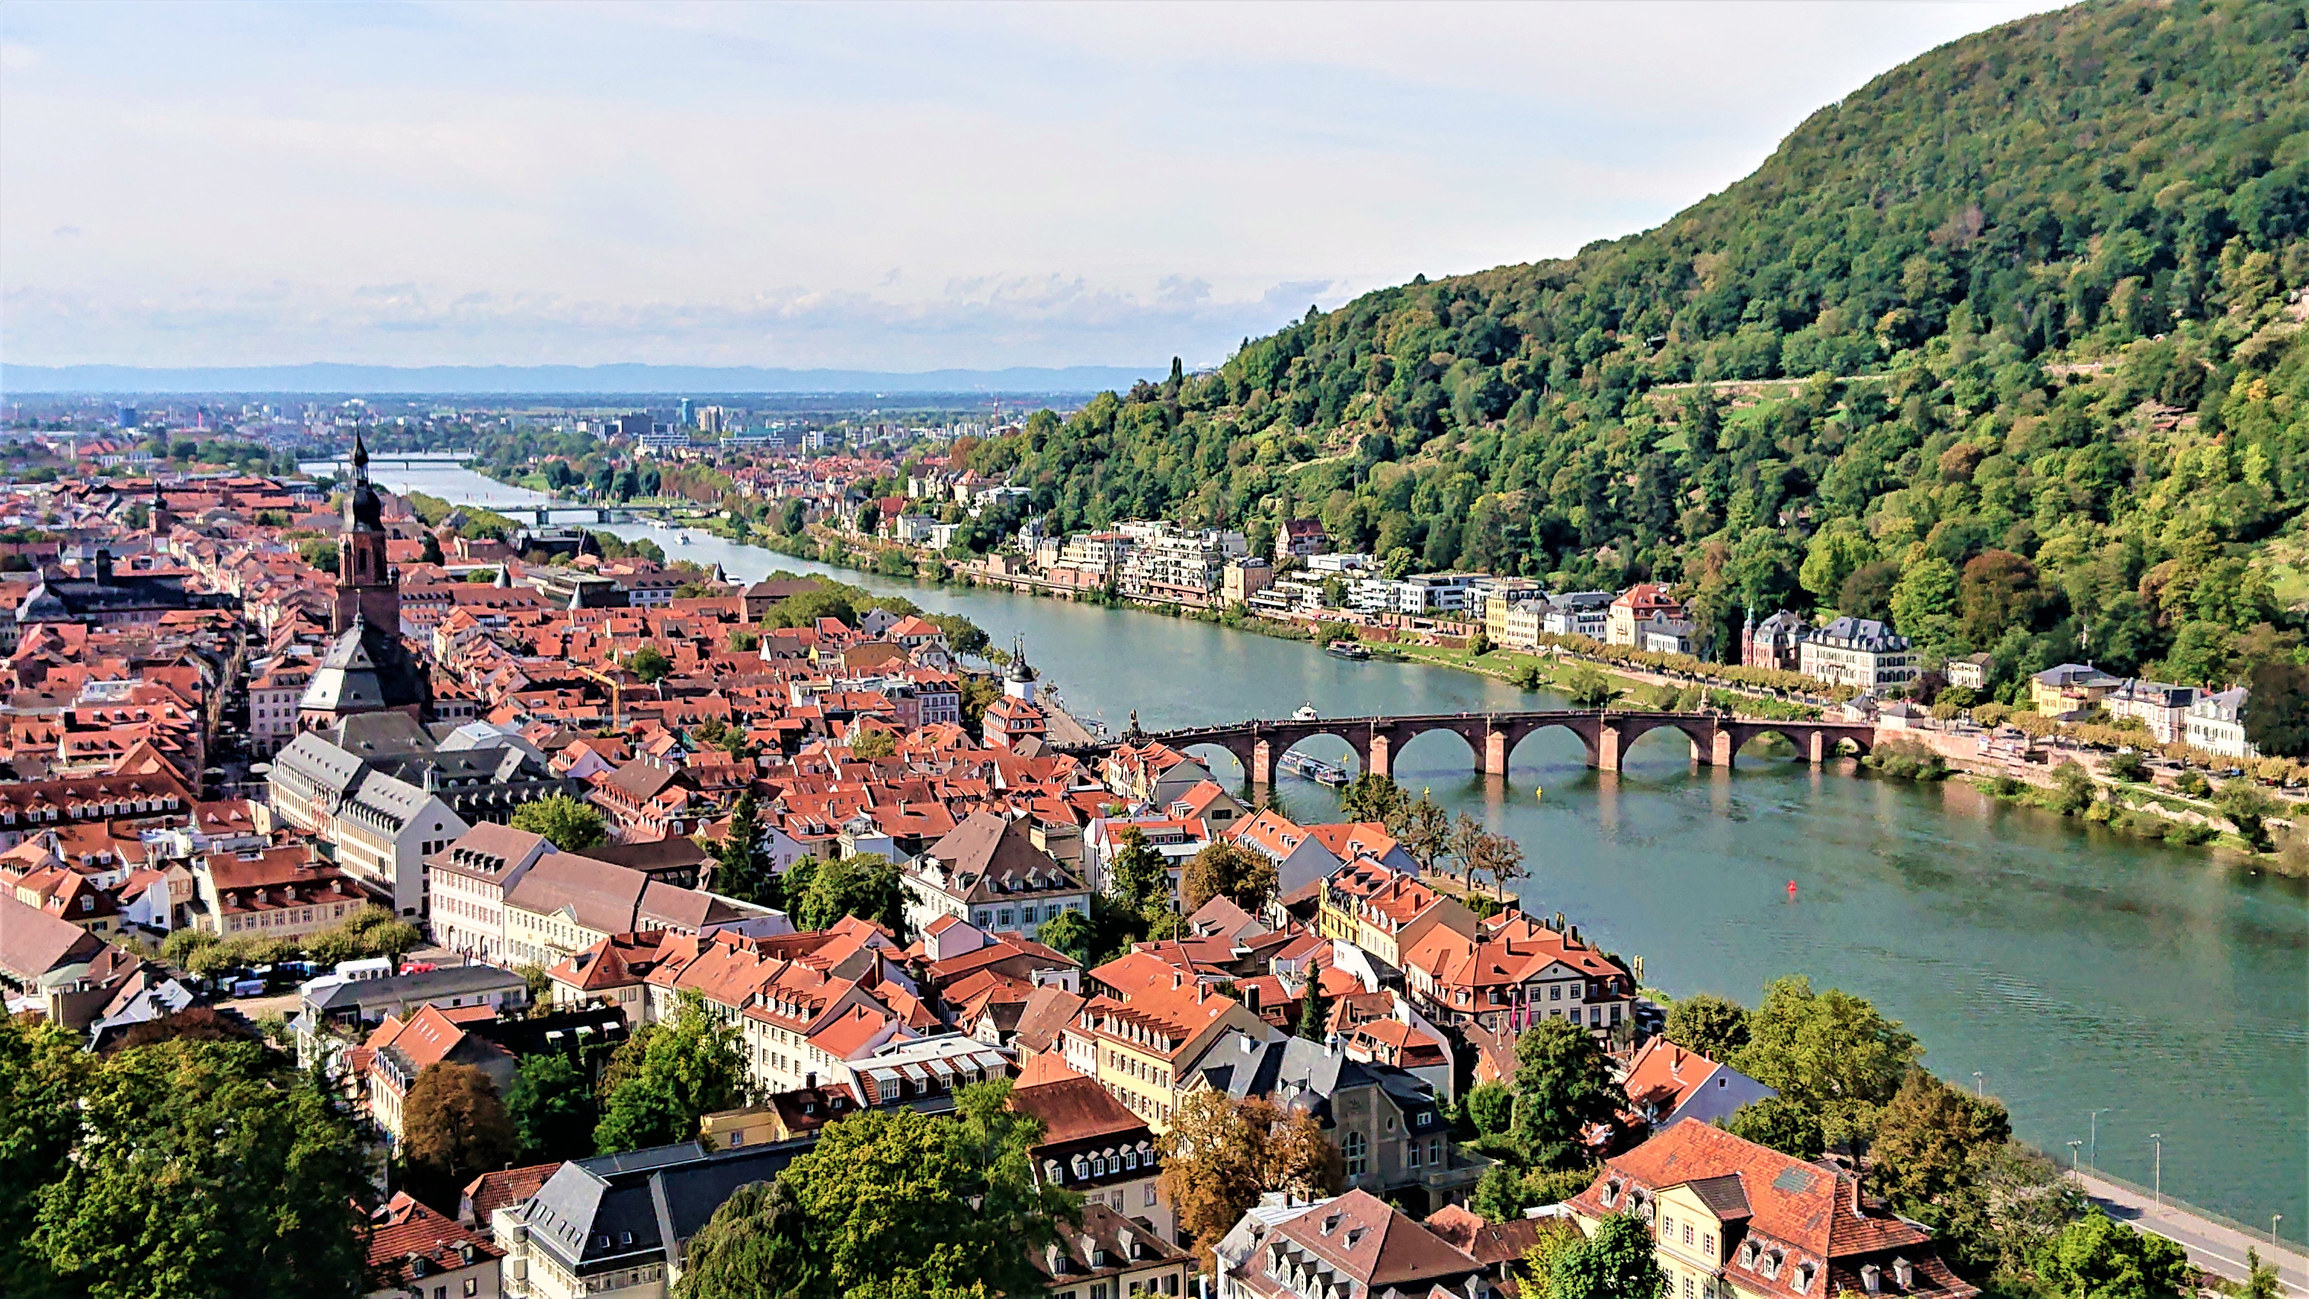 Panoramic view of Heidelberg city with the Neckar river running through it.